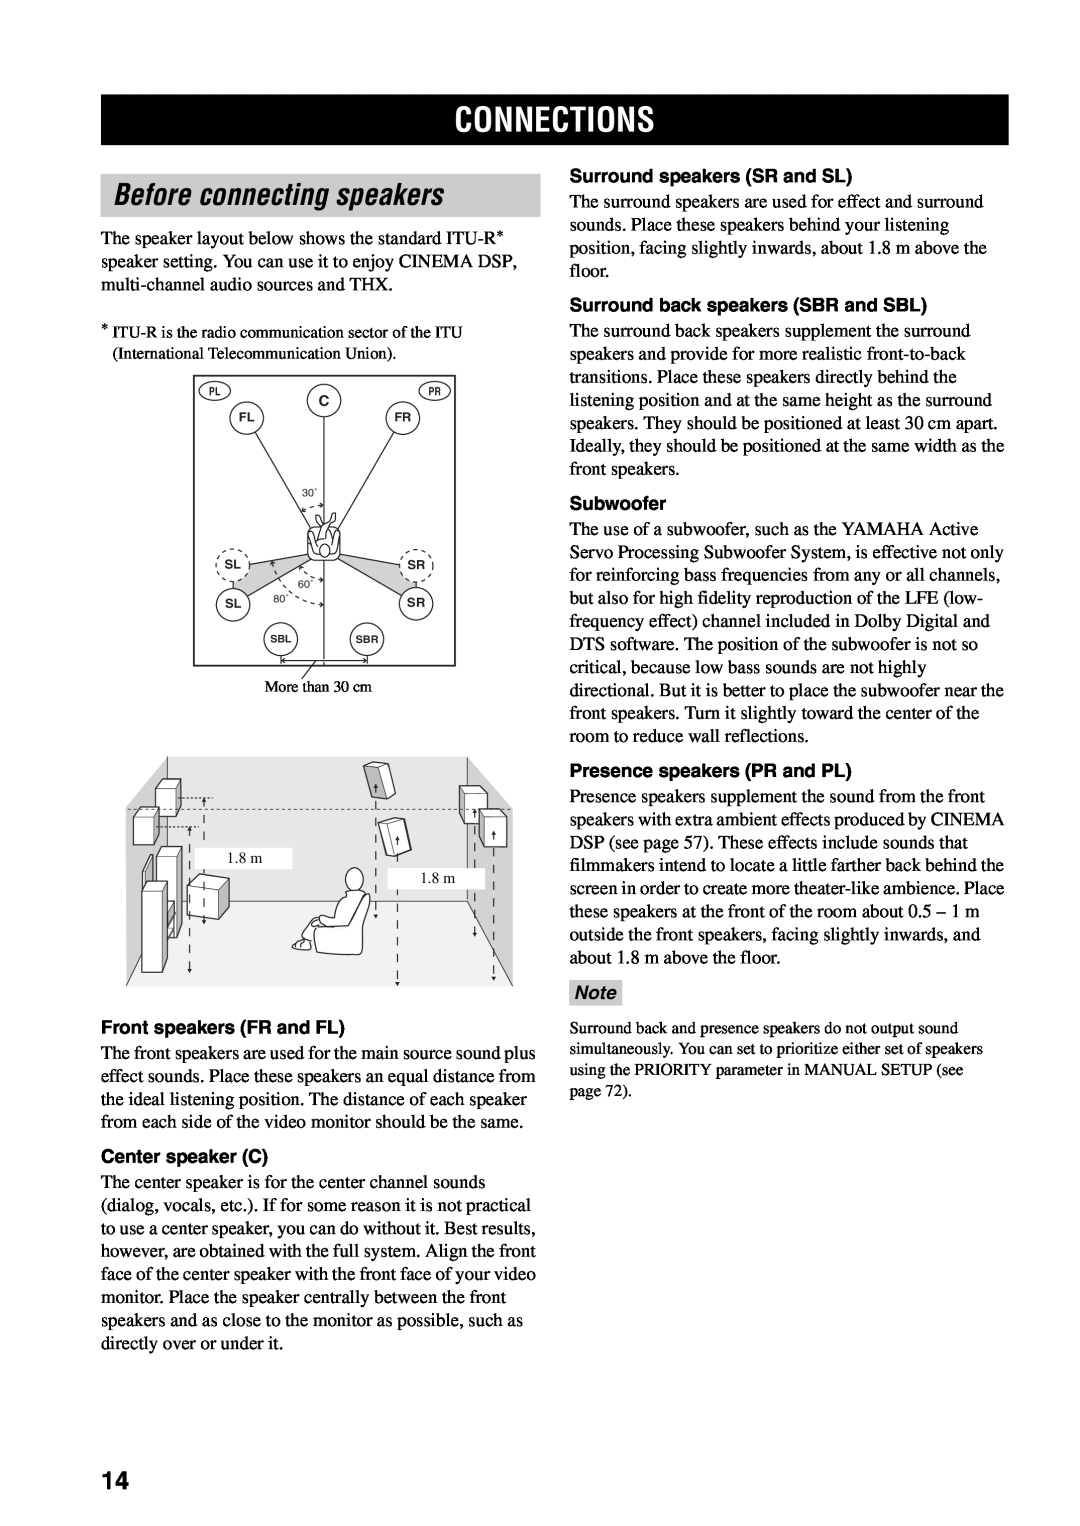 Yamaha RX-V1600 owner manual Connections, Before connecting speakers 